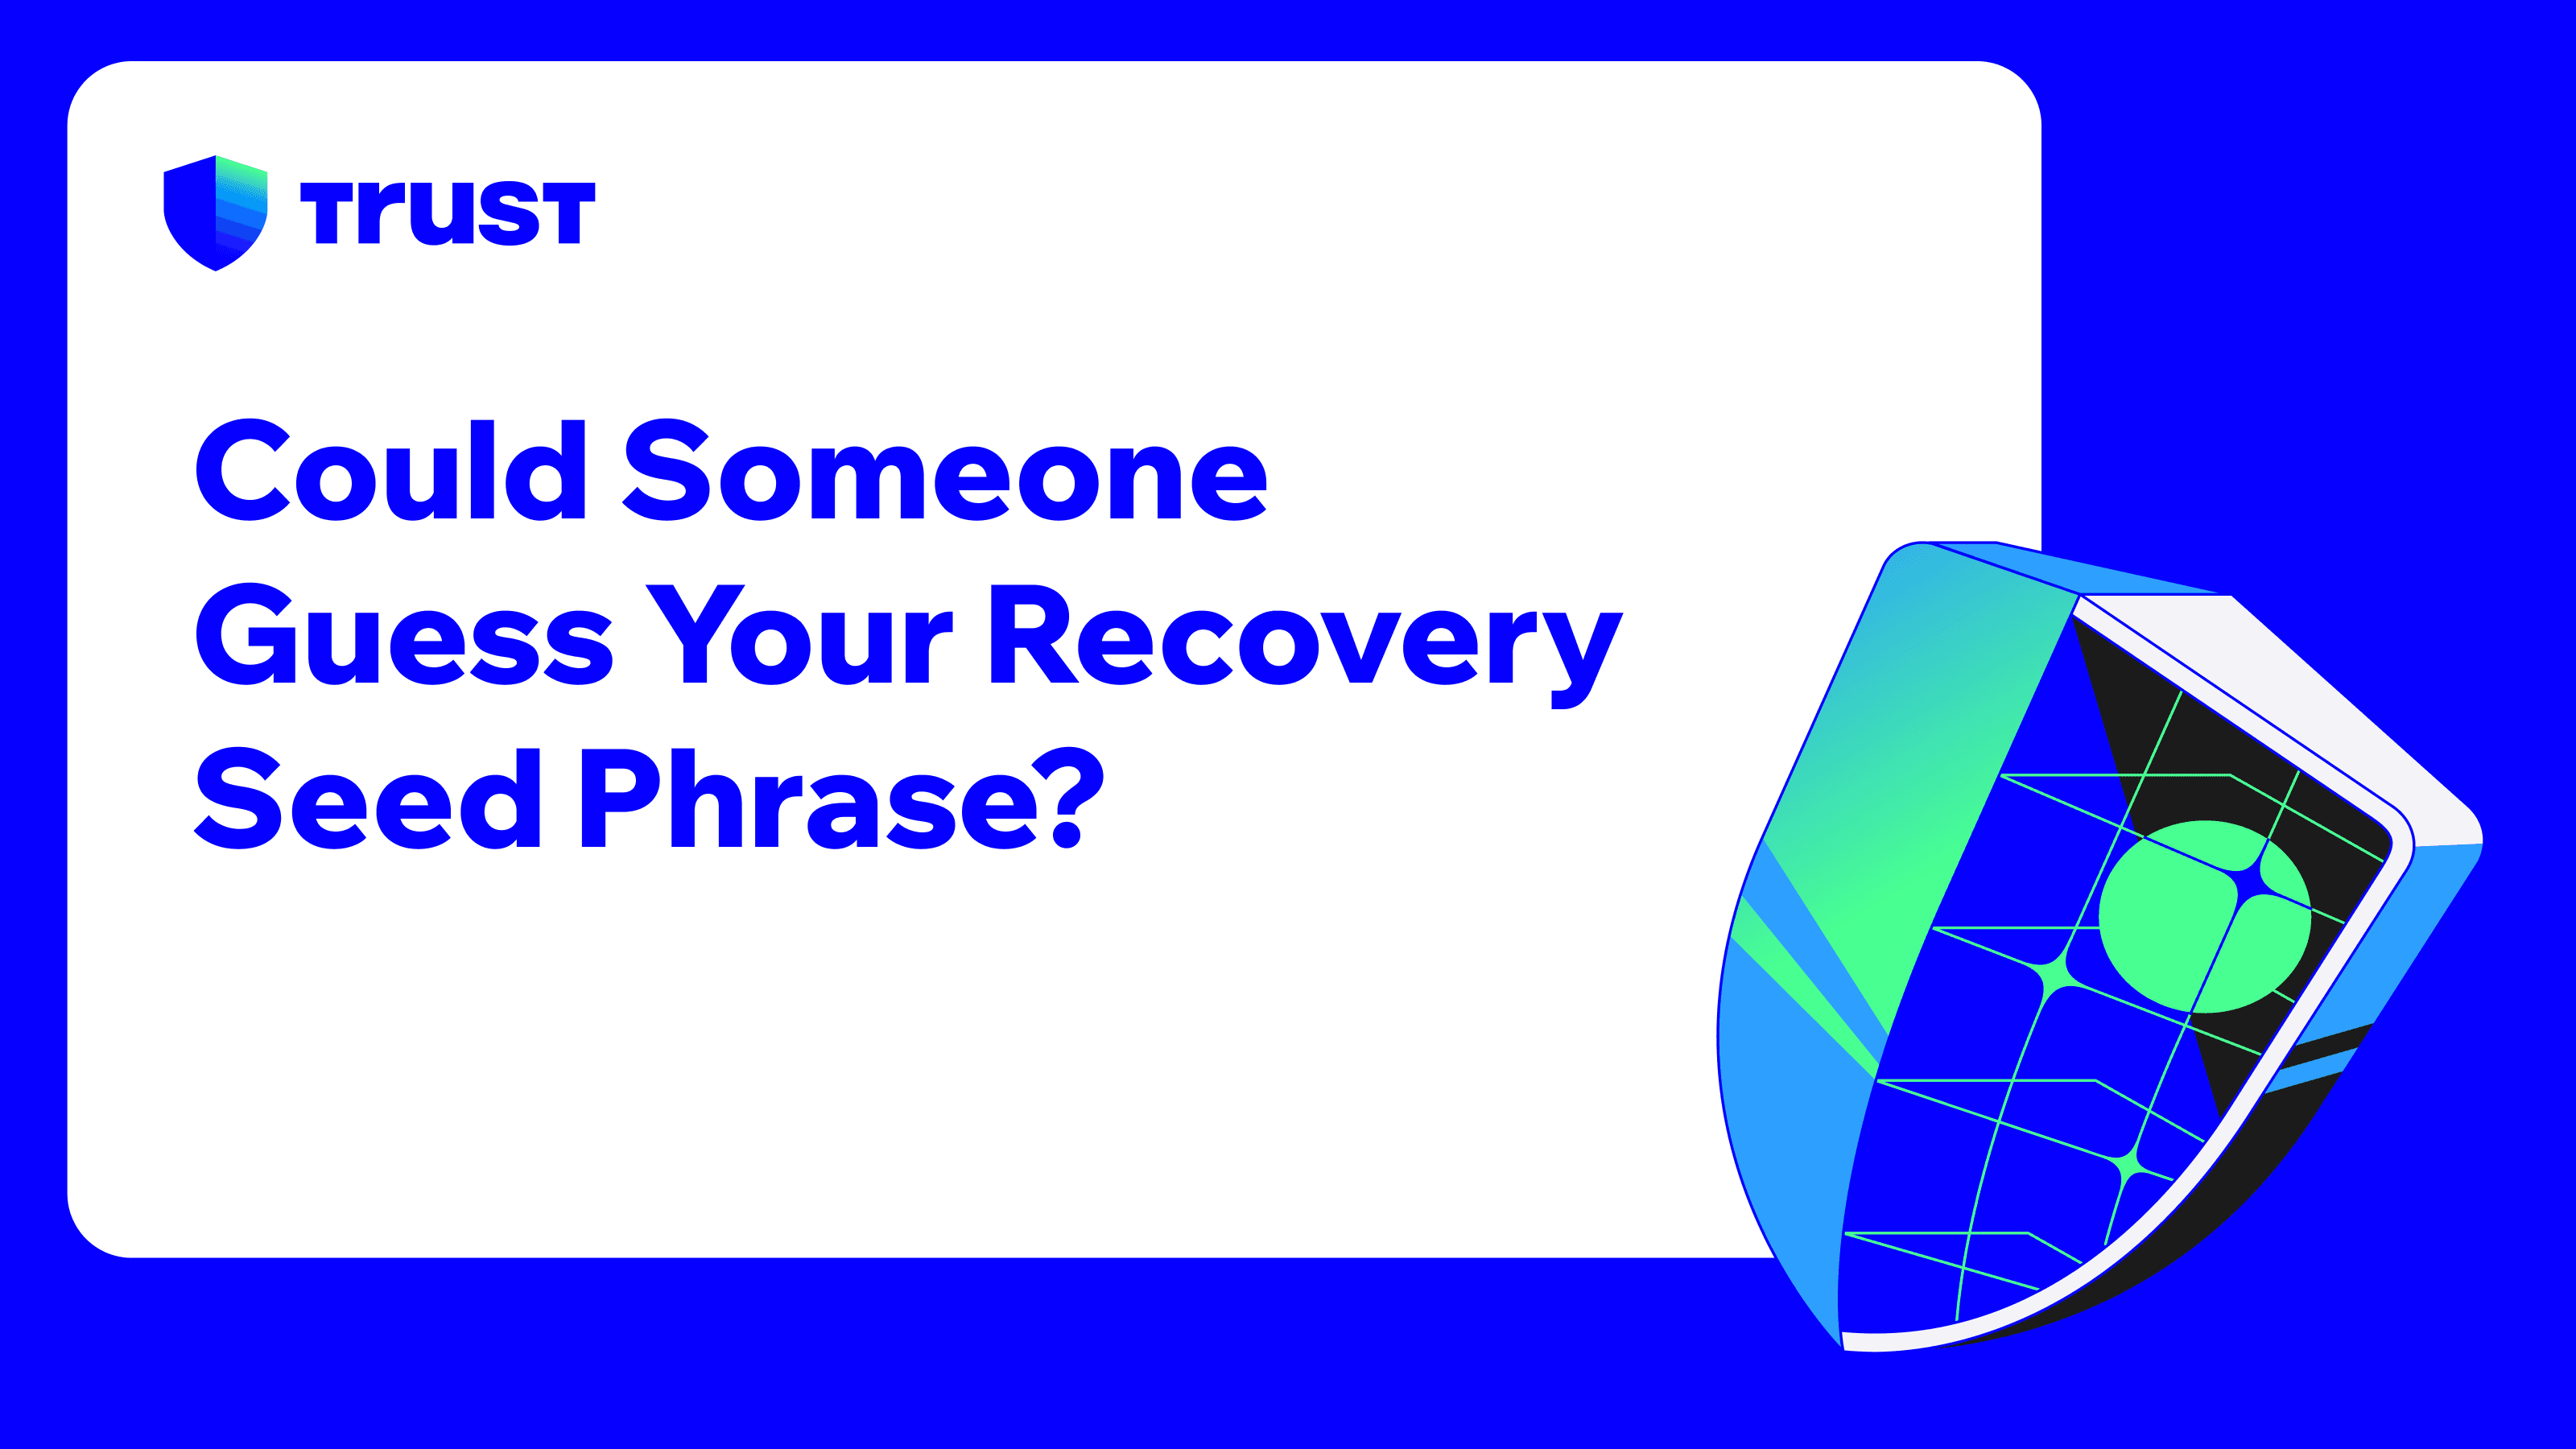 Could Someone Guess Your Recovery Seed Phrase?